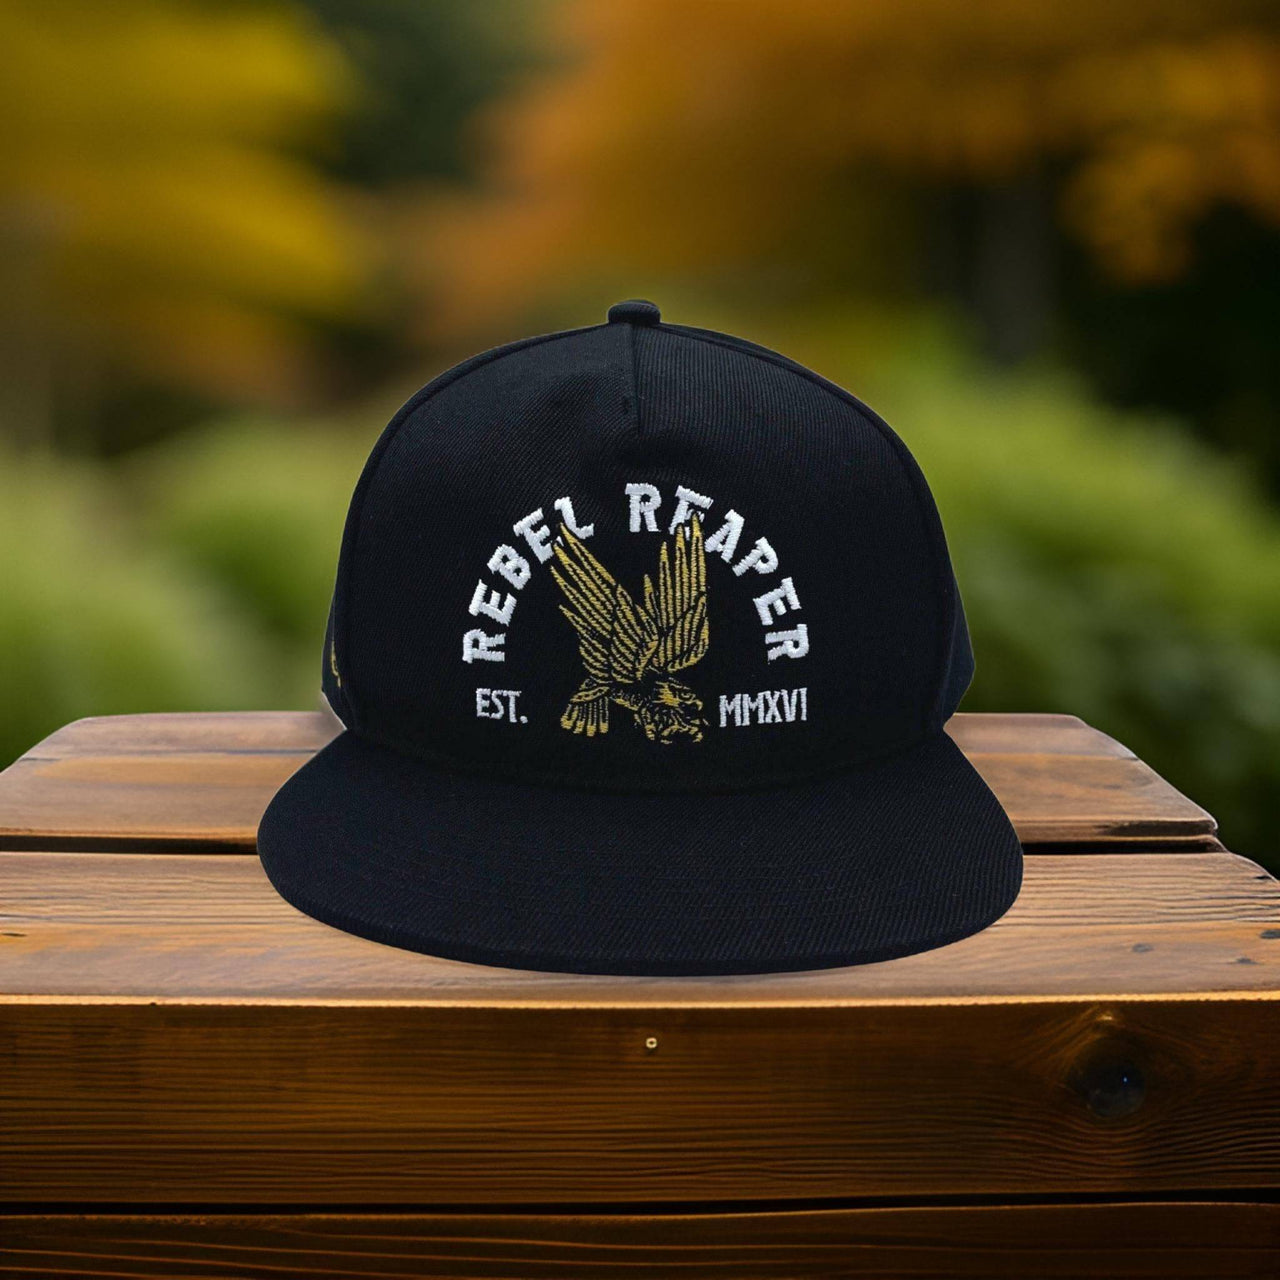 Black Quality Goods Embroidered Snapback